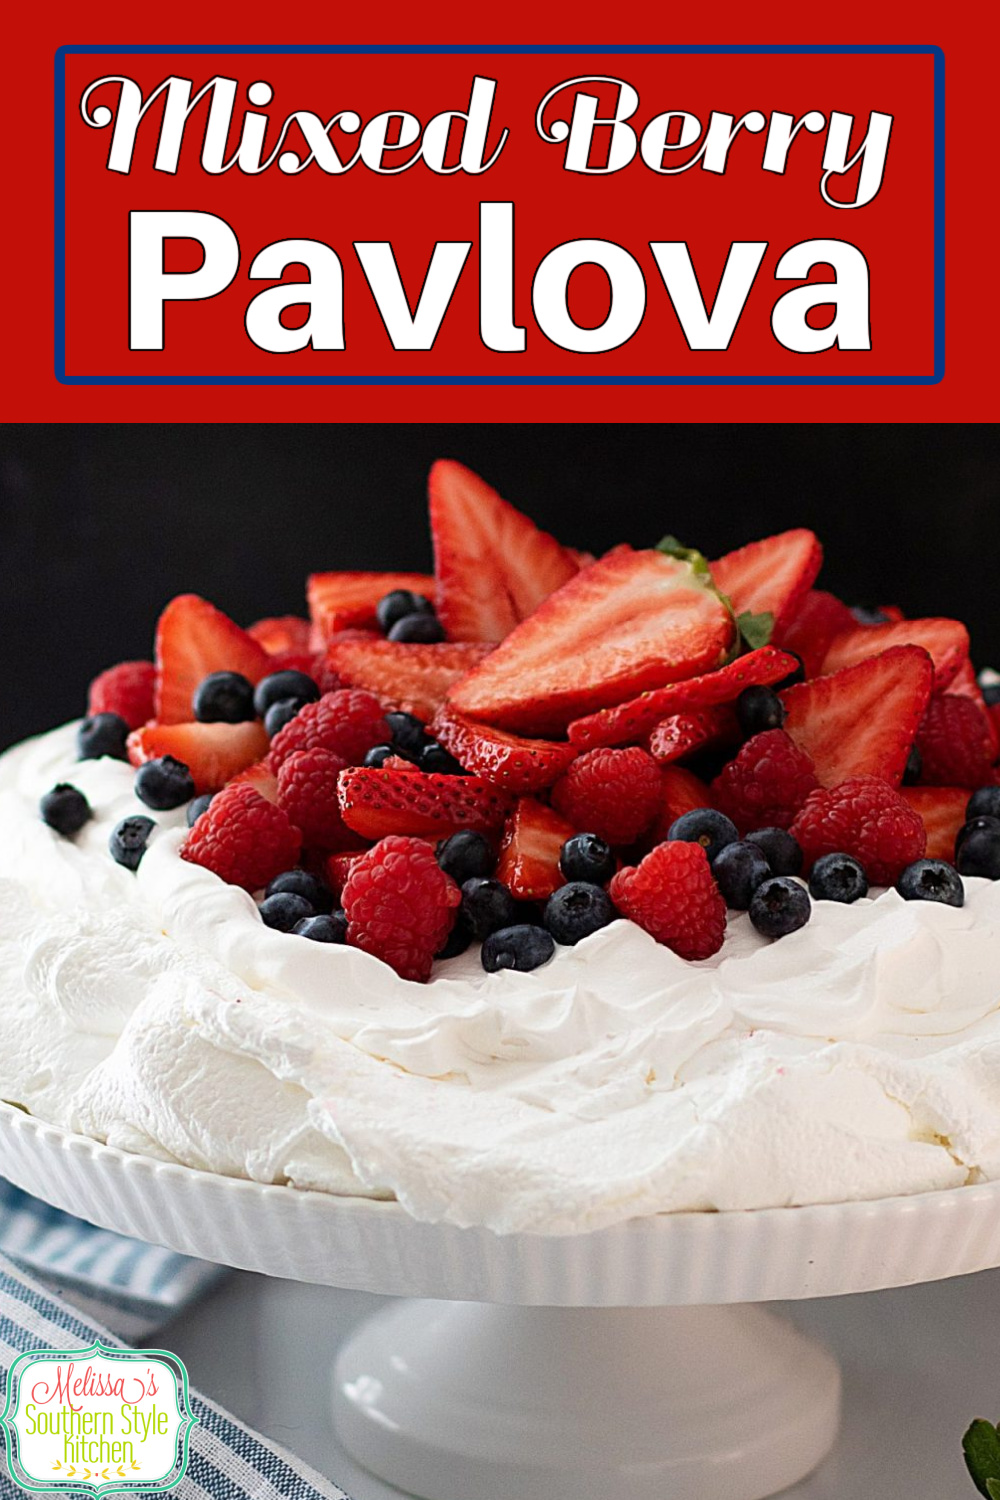 This billowy Mixed Berry Pavlova is a decadent dessert that's suitable for casual dining or entertaining #pavlova #mixedberries #easypavlova #pavlovarecipe #homemadewhippedcream #easydesserts #desserts #dessertfoodrecipes #southernrecipes via @melissasssk